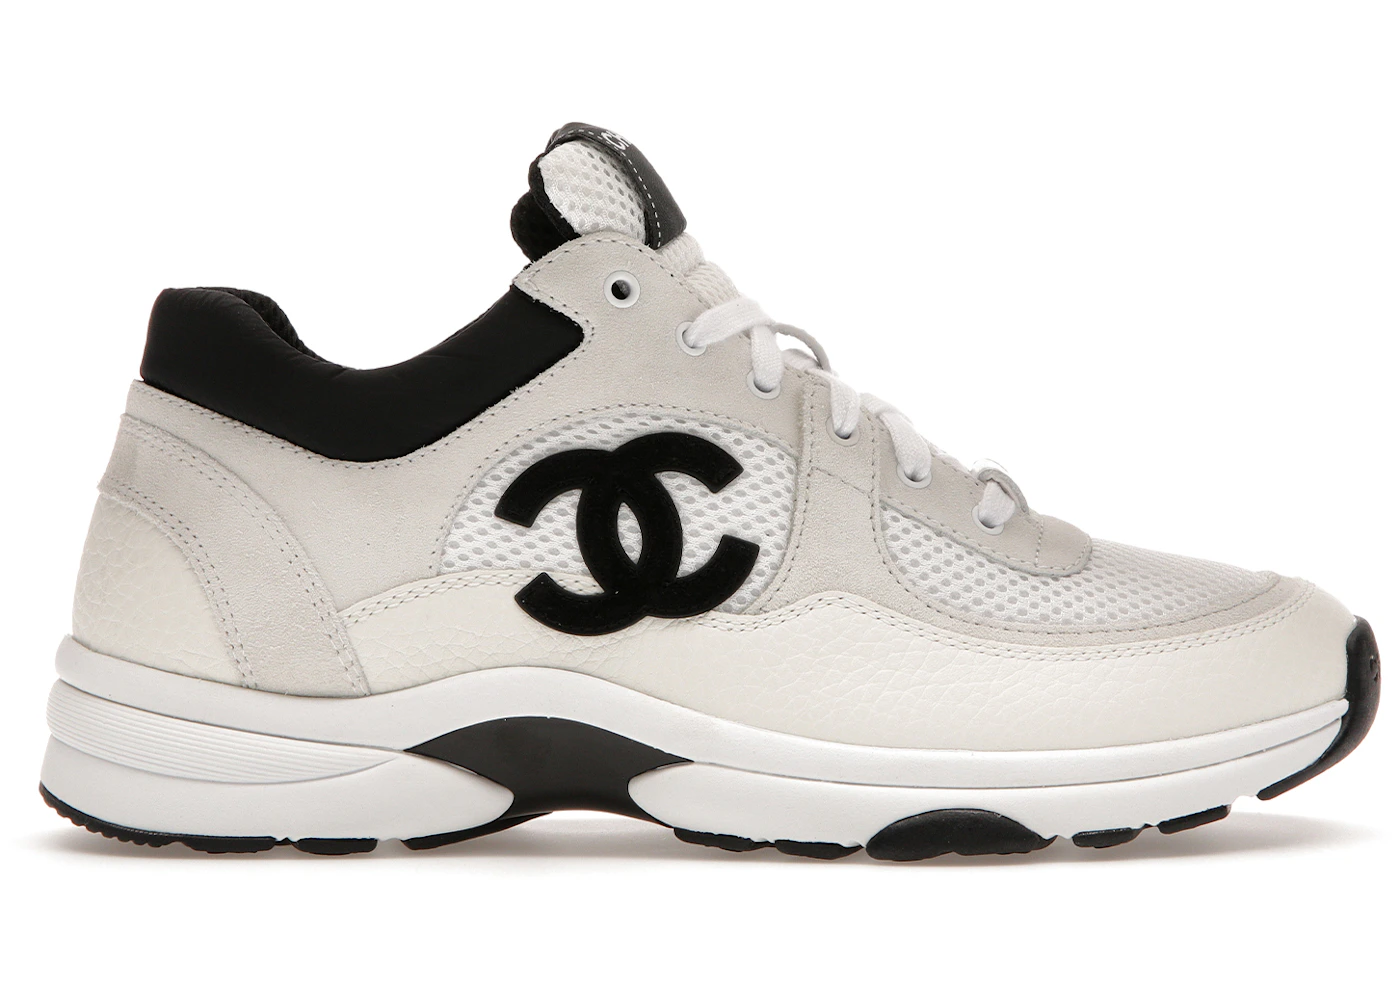 chanel suede sneakers